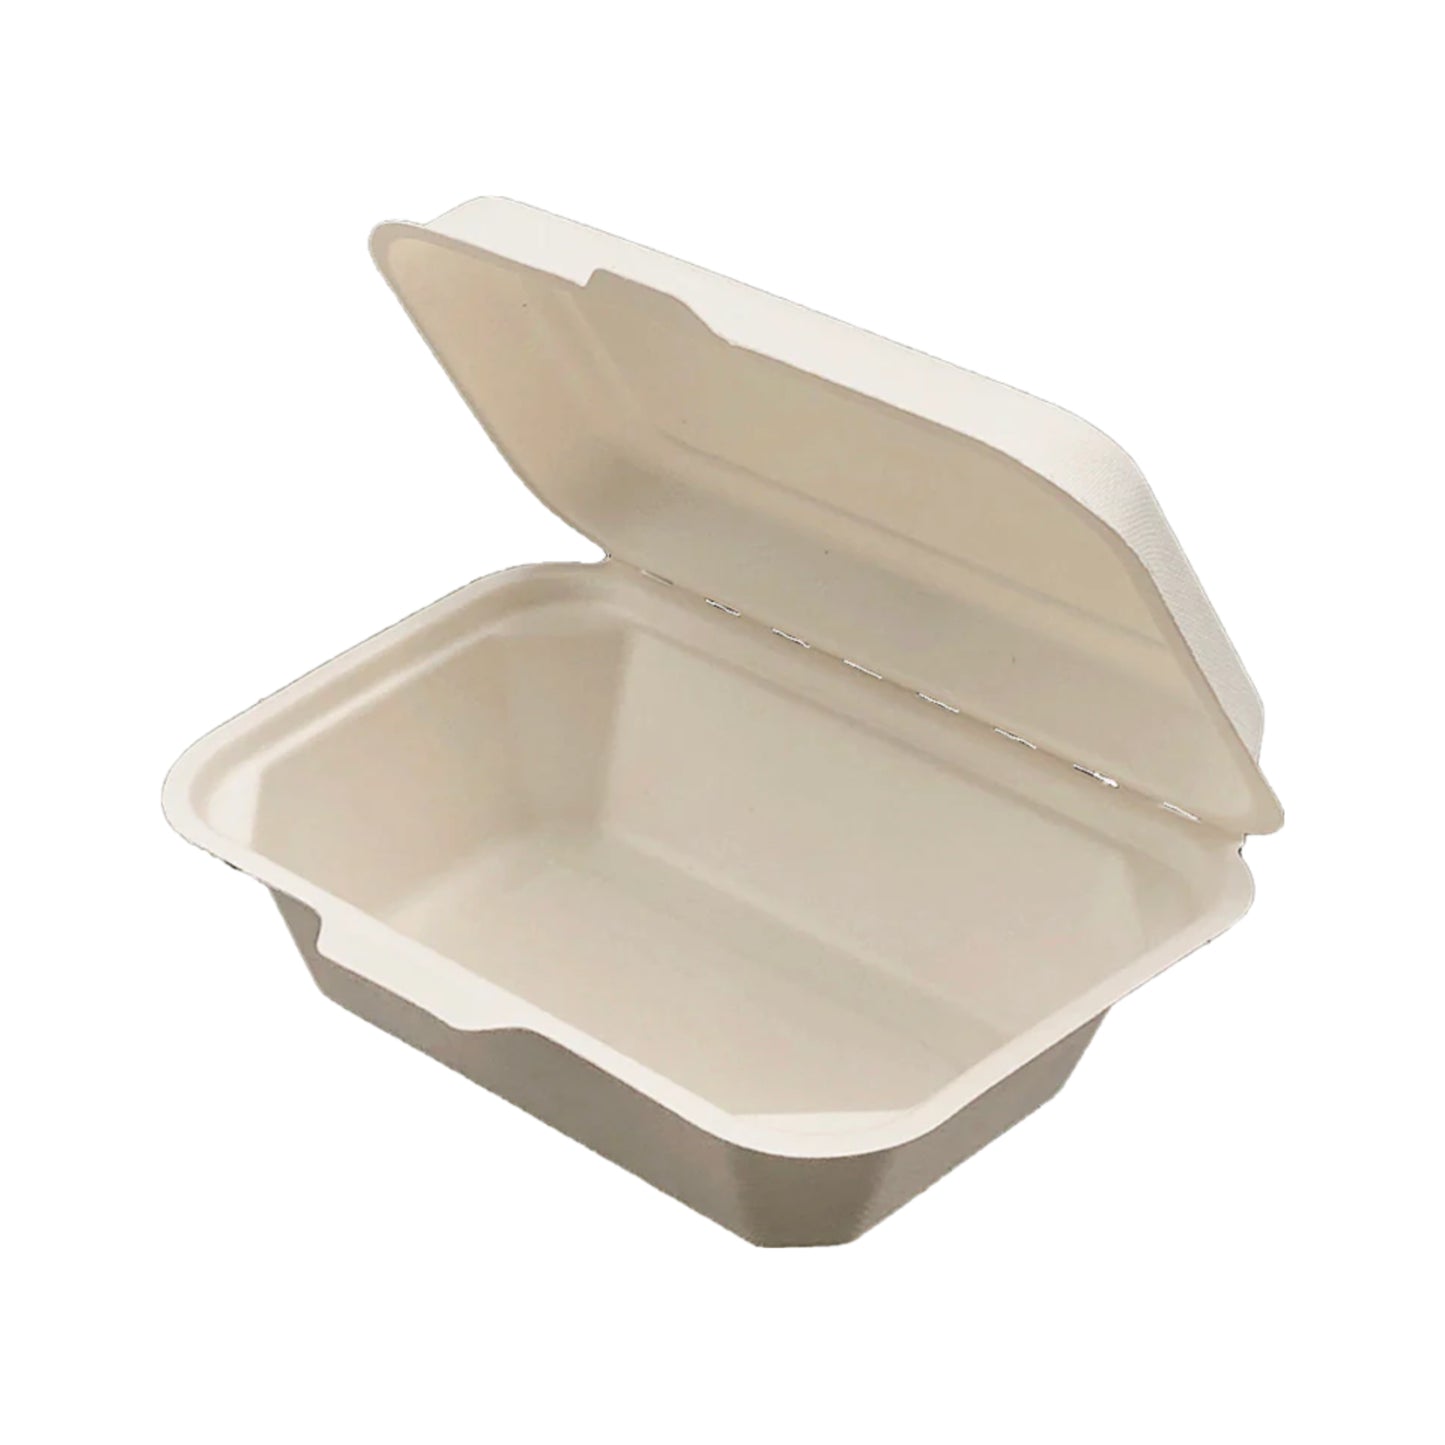 KIS-S600G | 7.25x5x2.5 inches, 1-Compartment, Sugarcane Clamshell Food Container; $0.127/pc